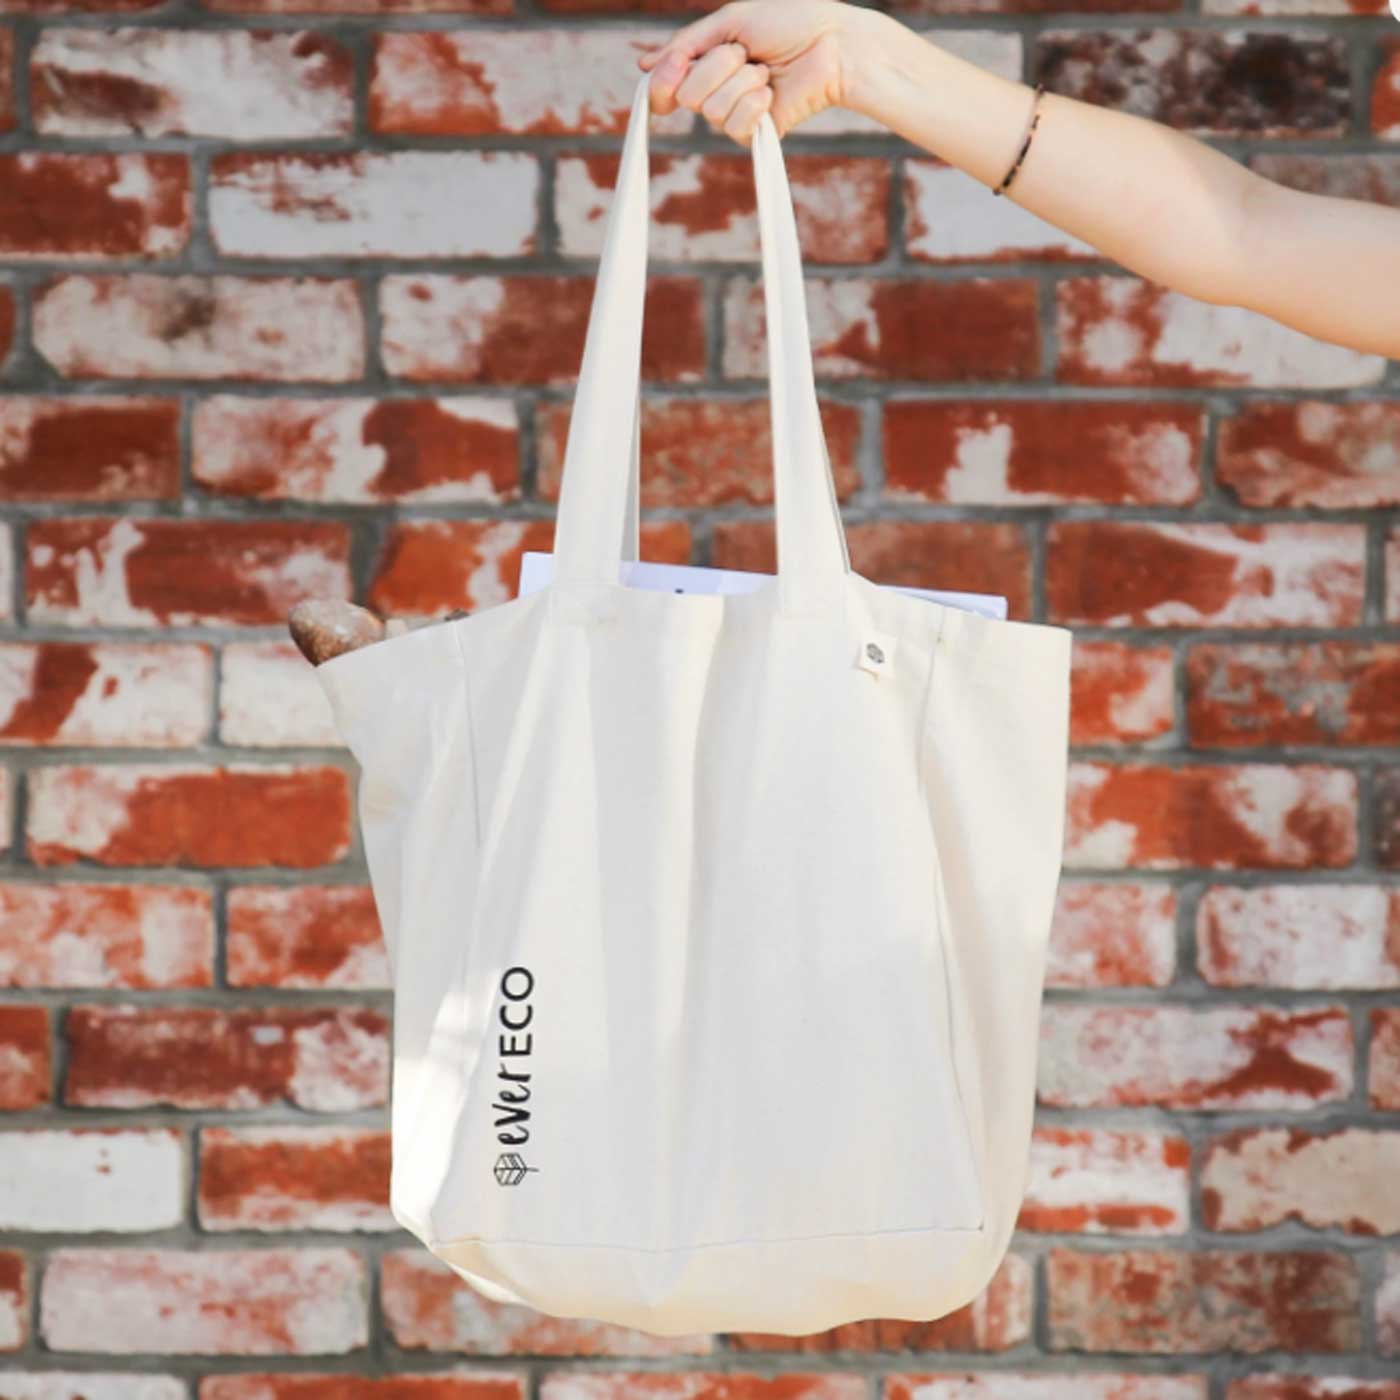 Reusable large cotton and plastic-free tote shopping bag.